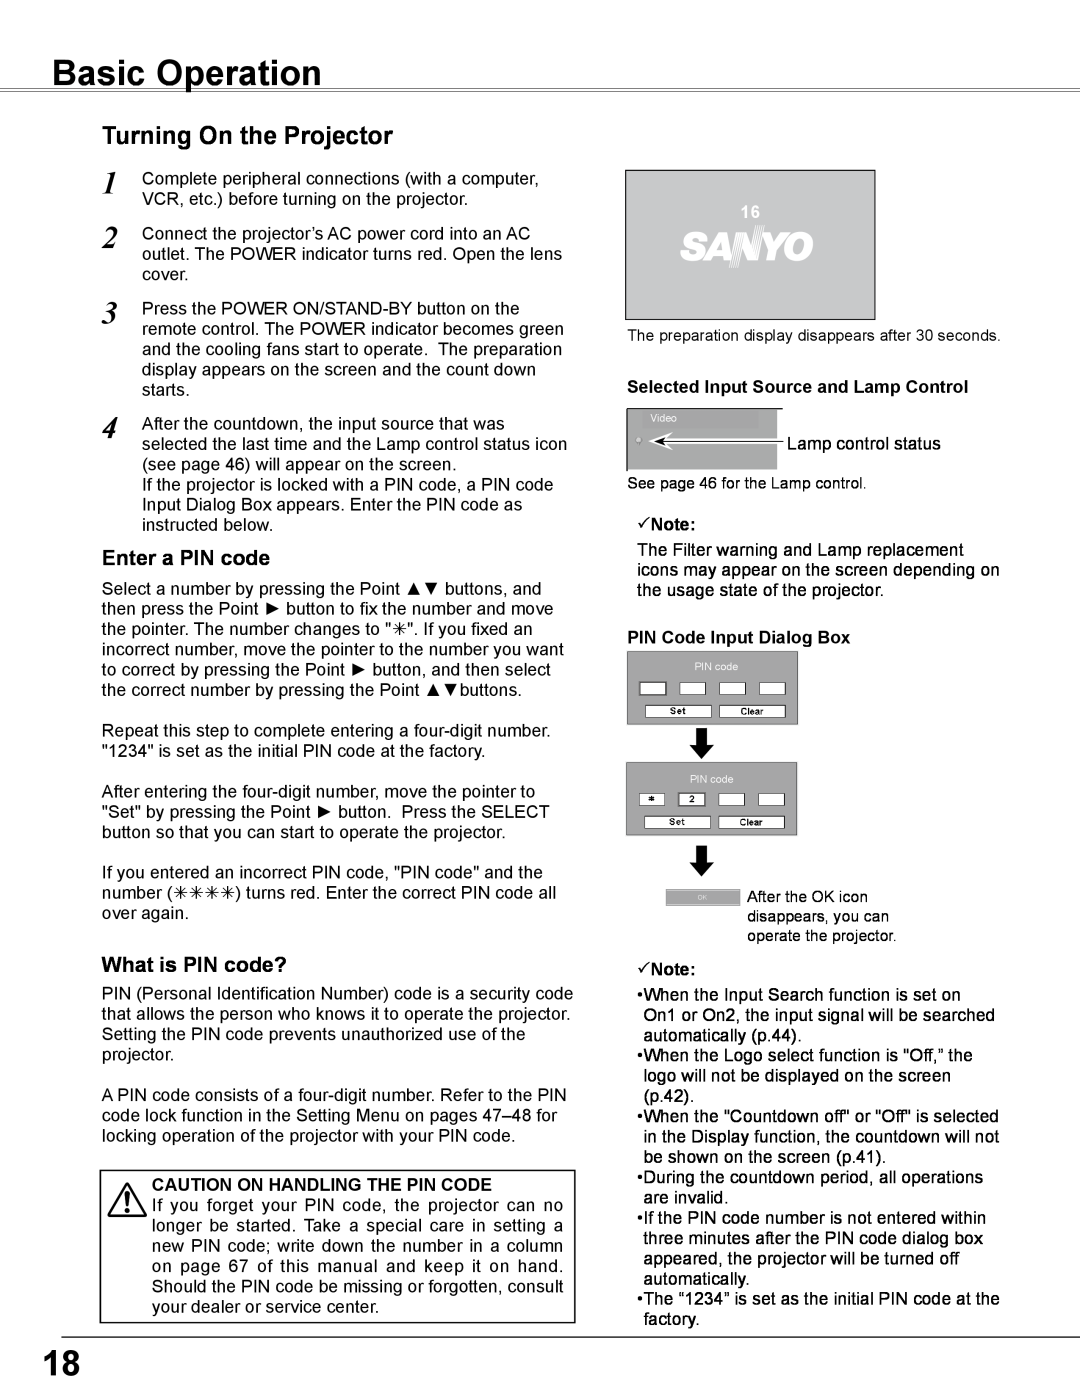 Sanyo PLC-WXE46 owner manual Basic Operation, Turning On the Projector, Selected Input Source and Lamp Control, Note 